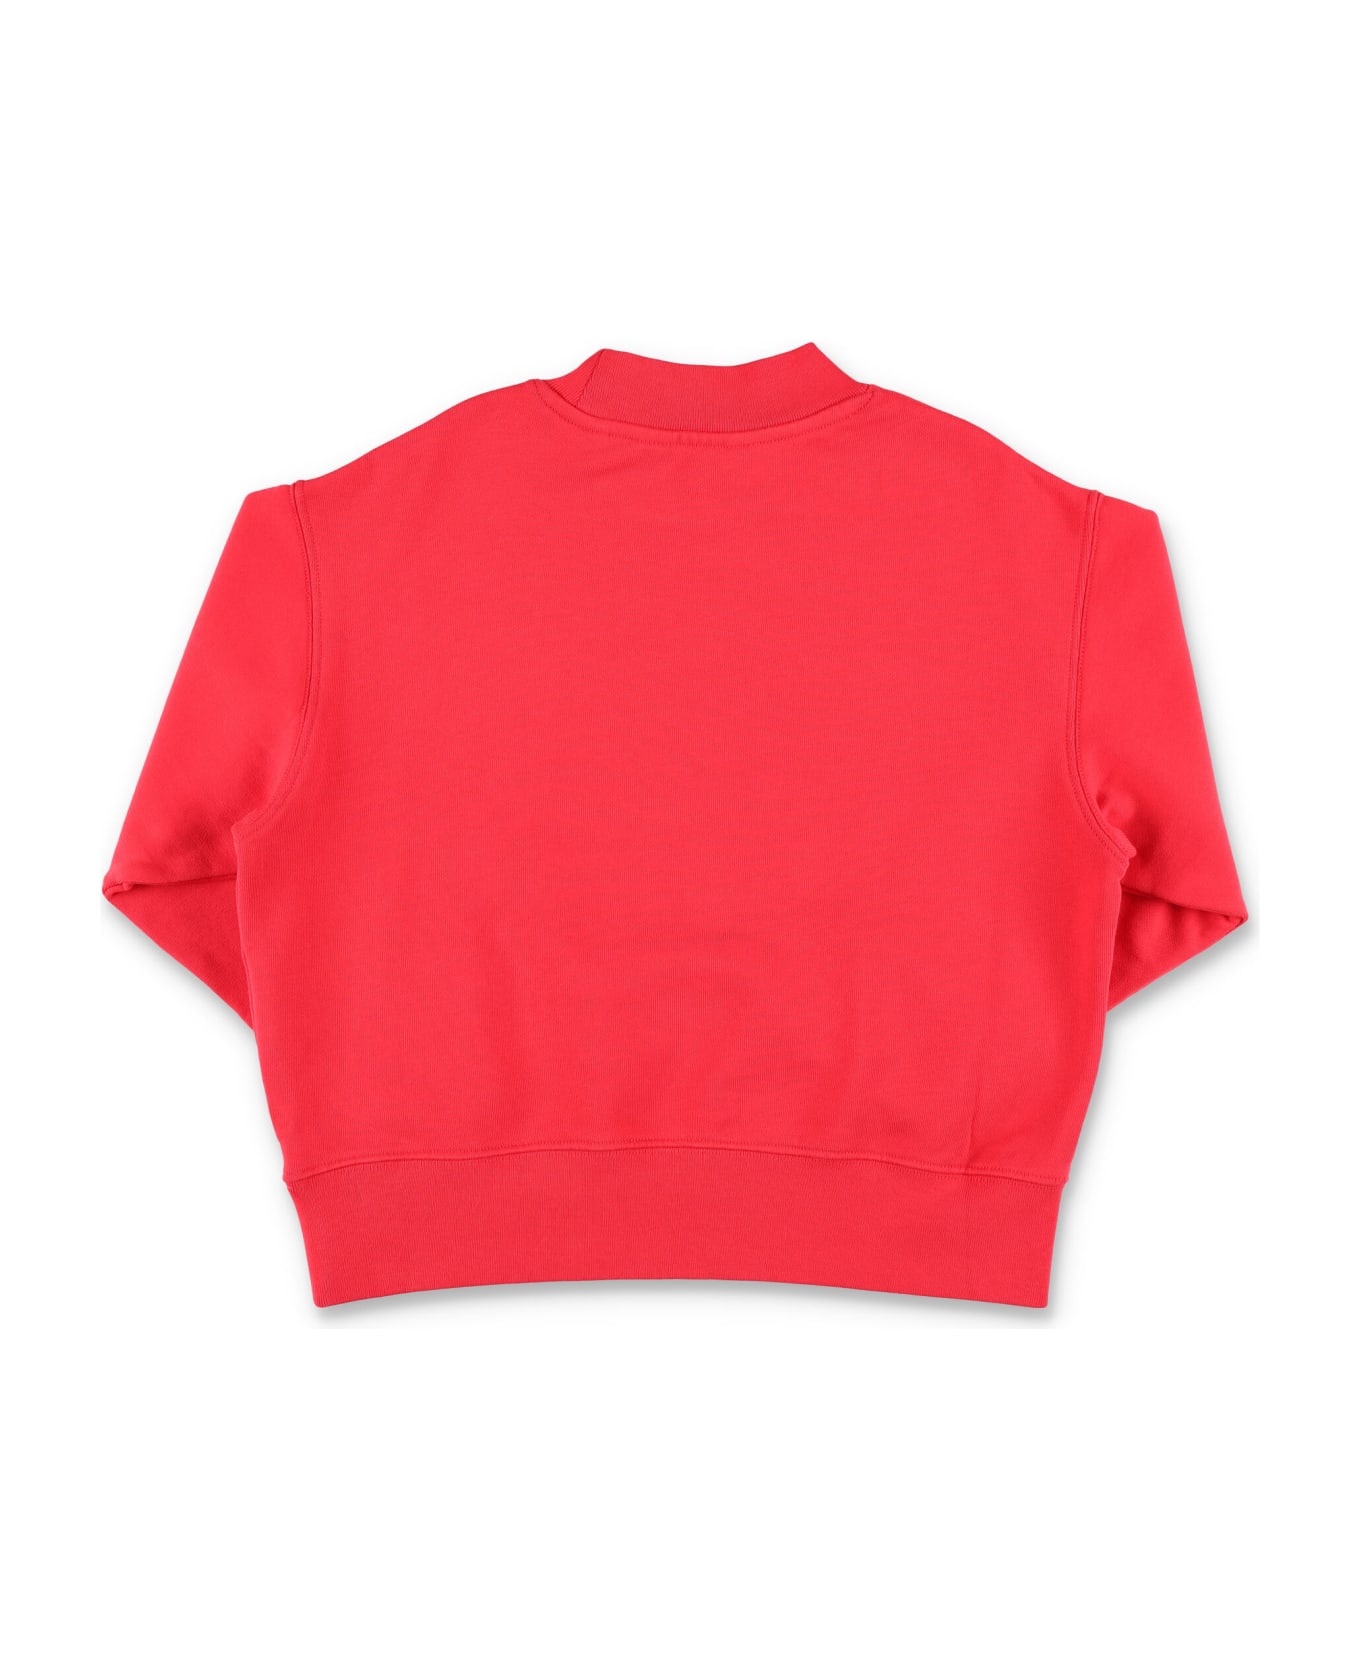 Palm Angels Classic Curved Logo Sweatshirt - RED